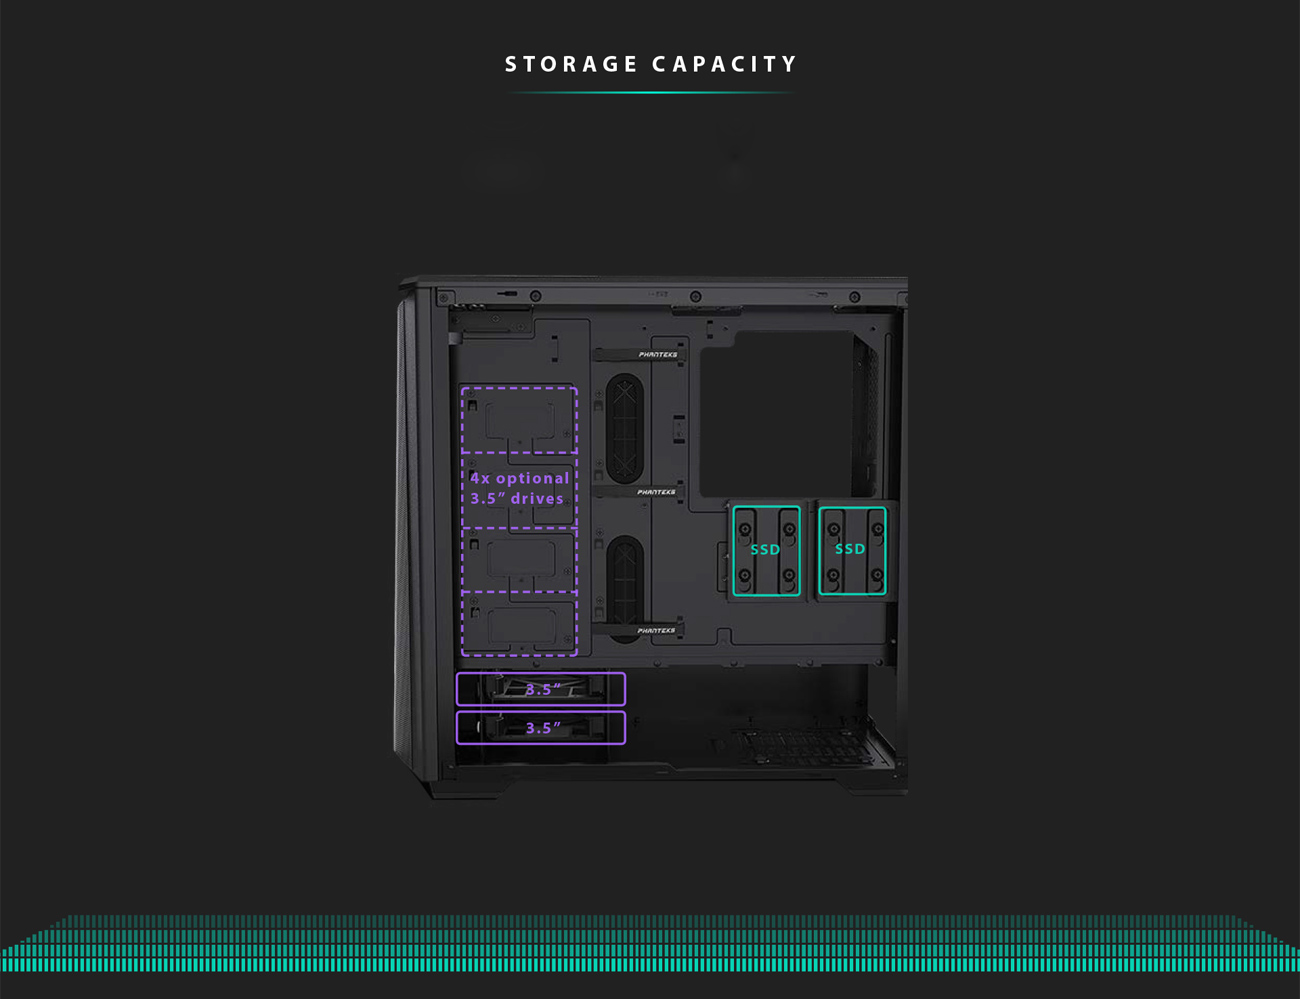 Storage Capacity supports 2x 3.5